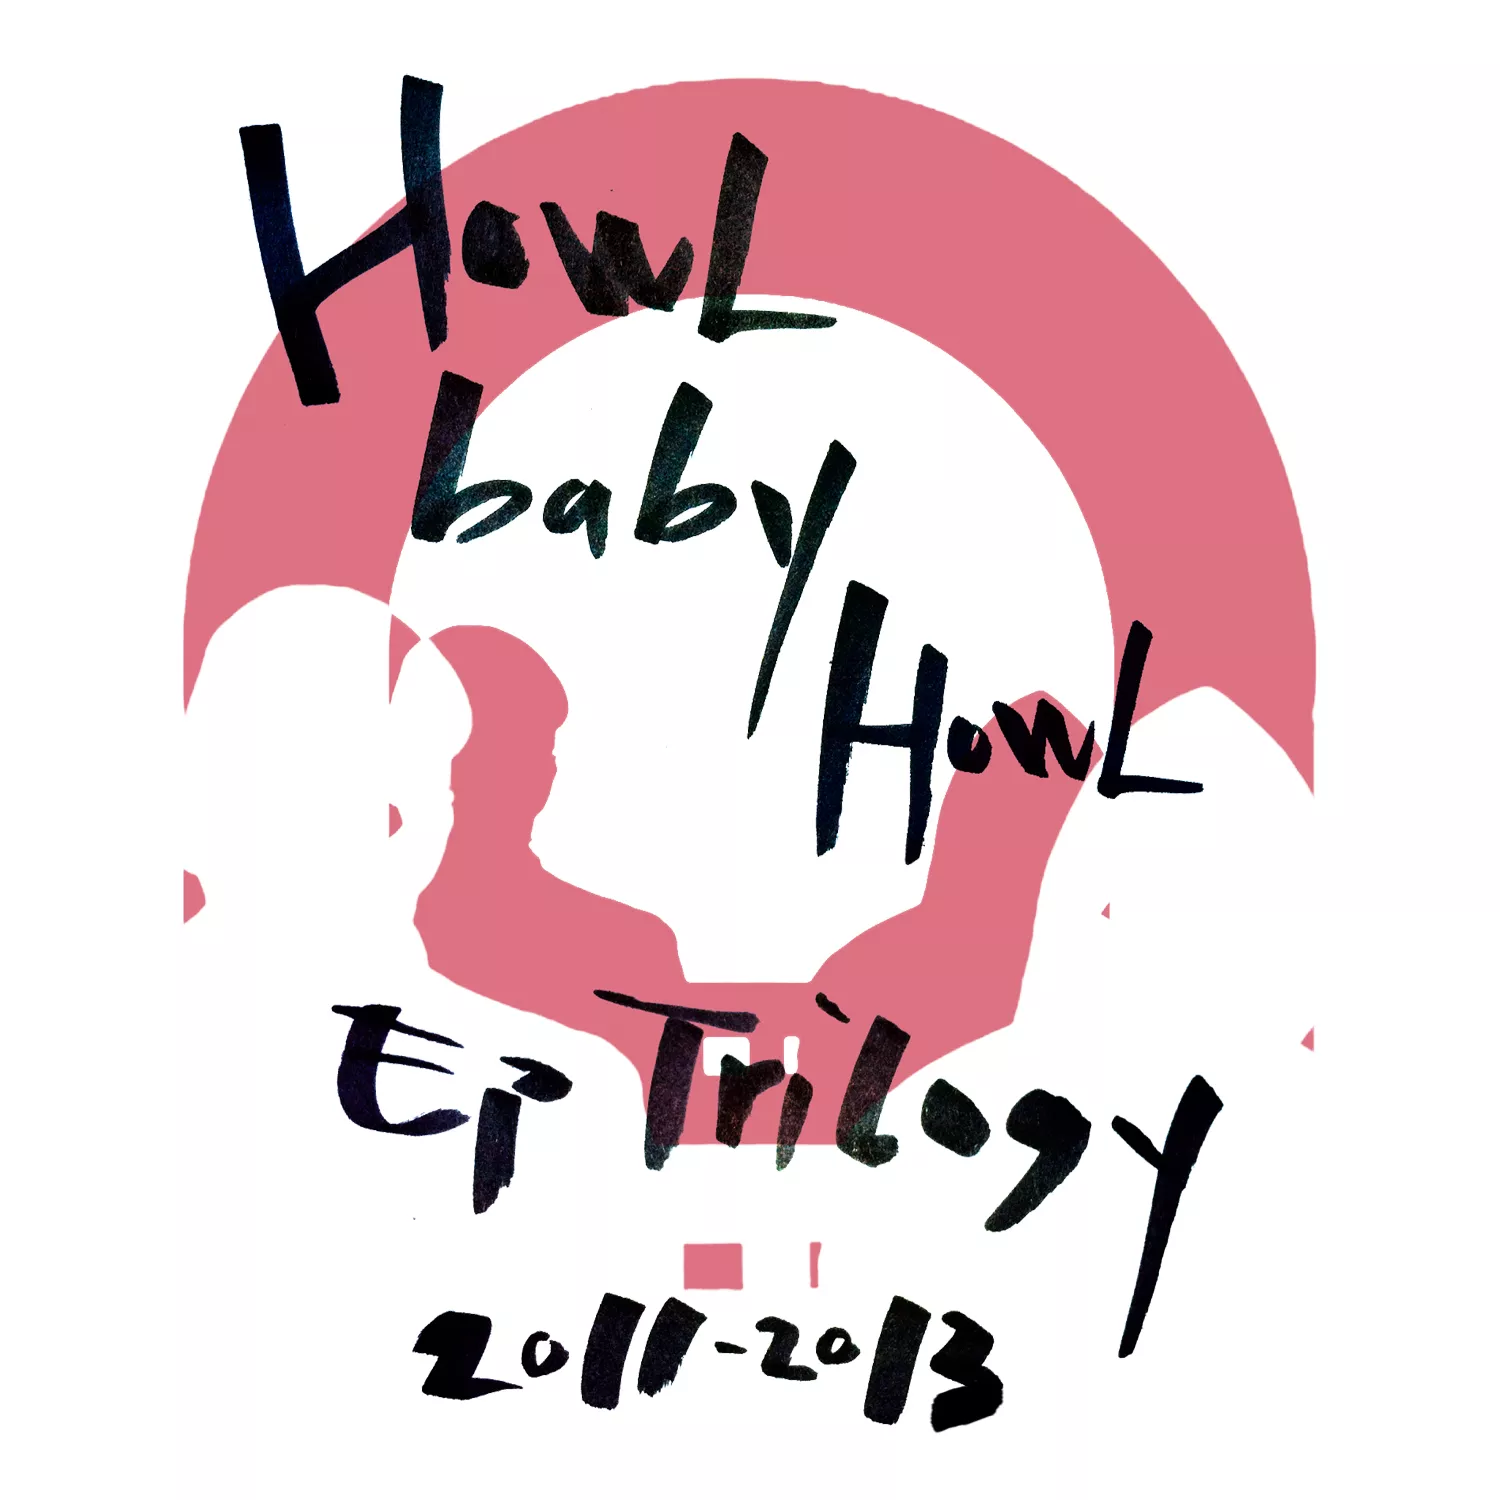 Ep Trilogy - Howl Baby Howl